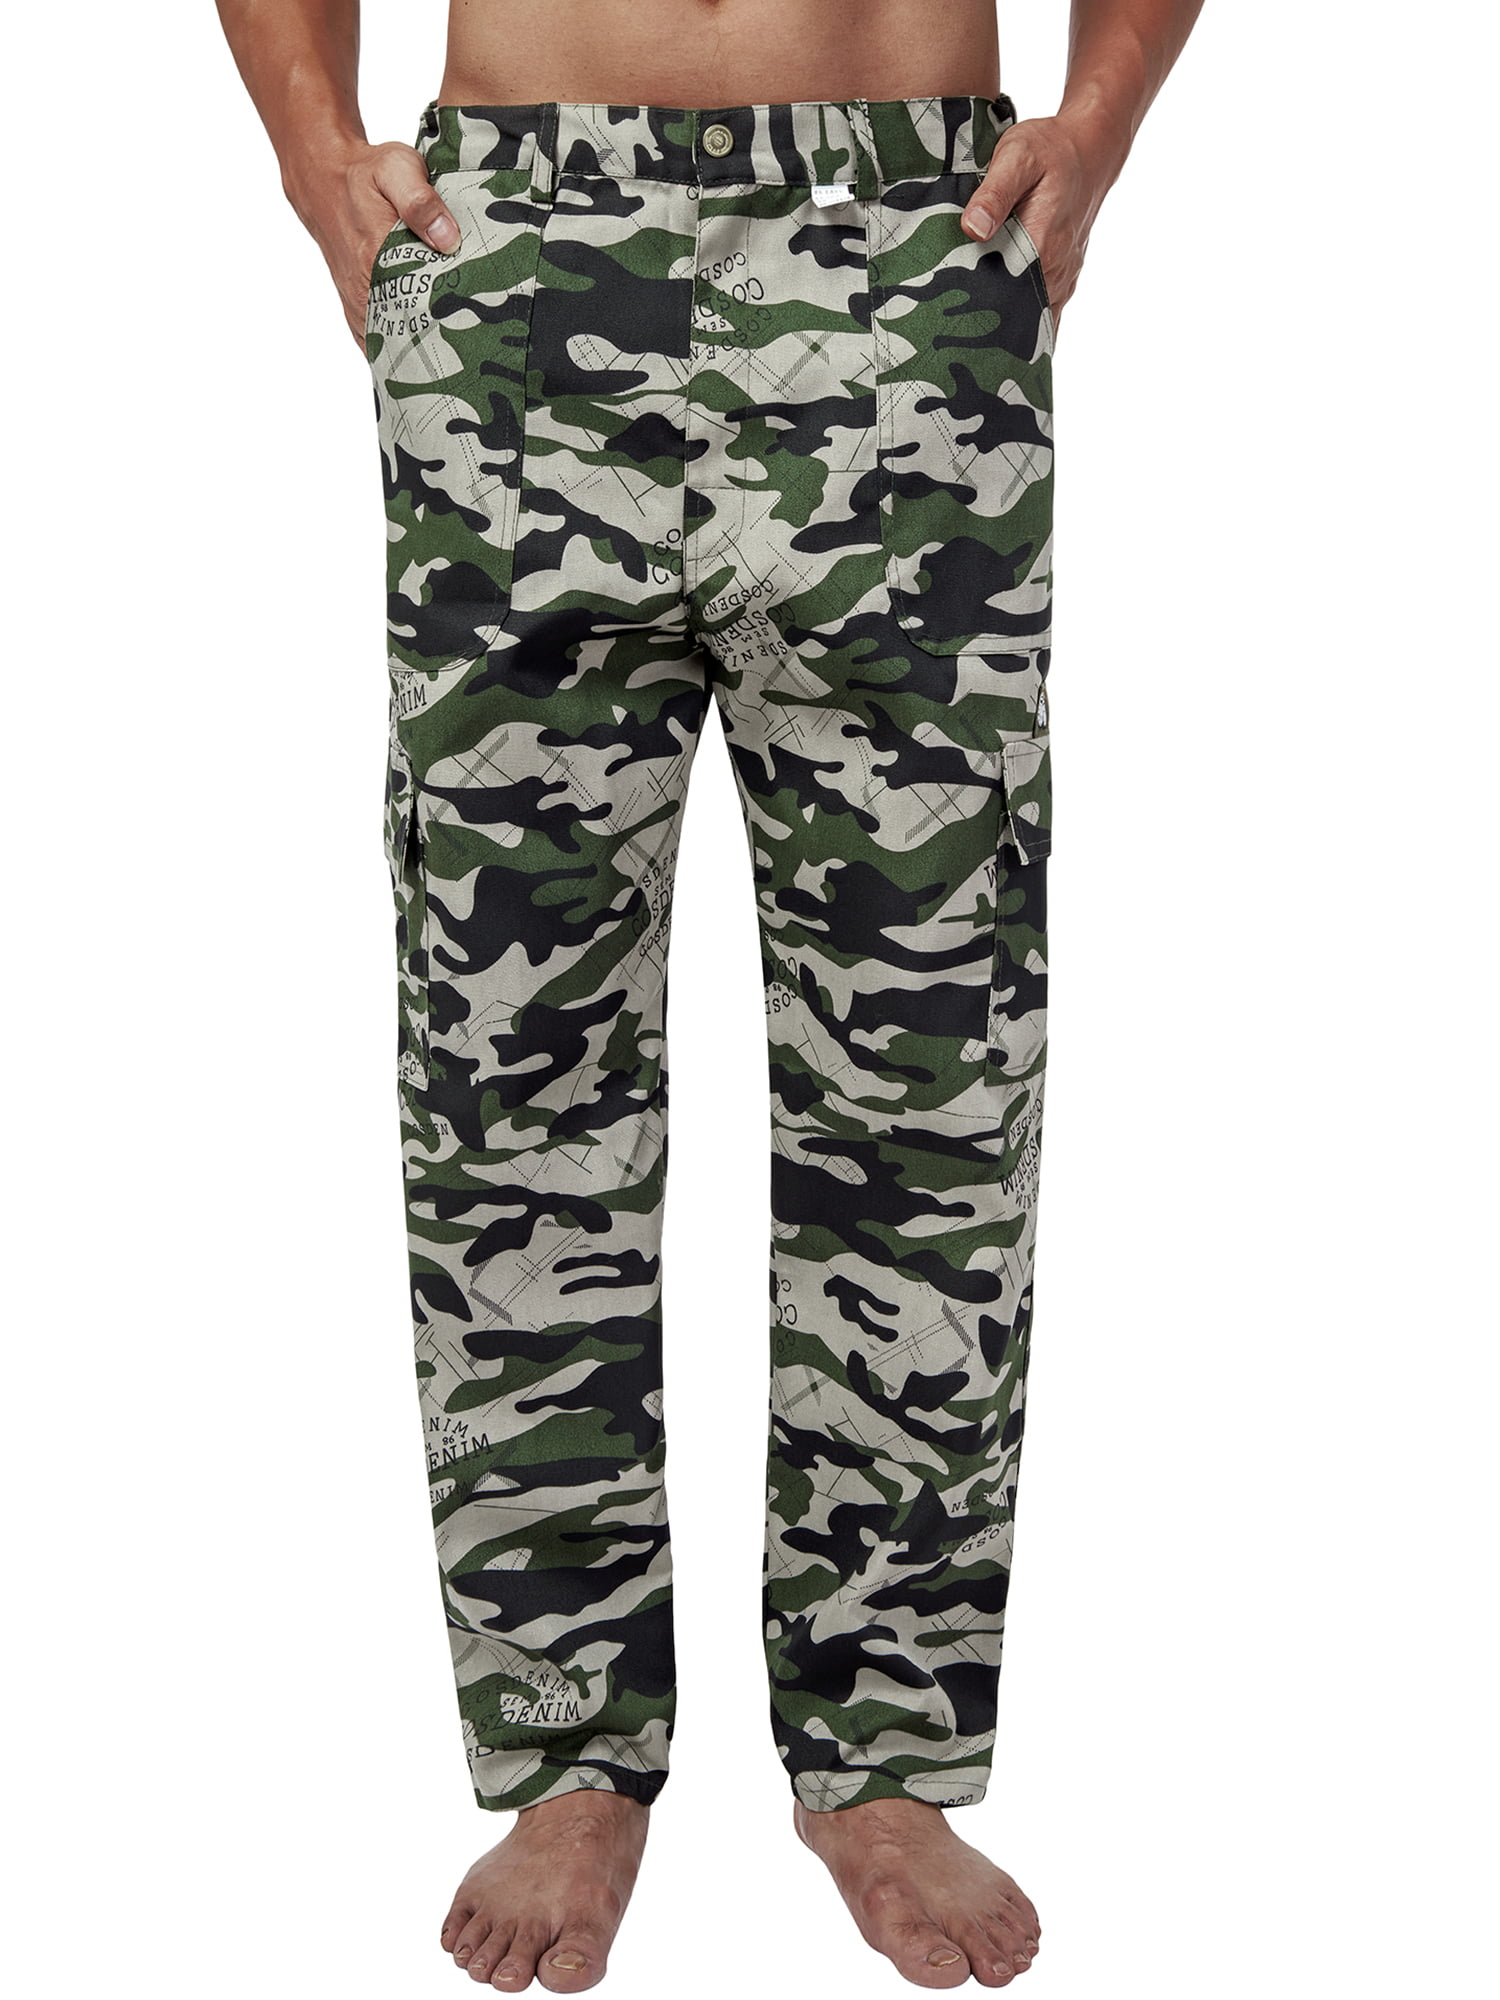 Dodoing - Mens Relaxed-Fit Cargo Pants Army Pants Multi Pocket Military ...